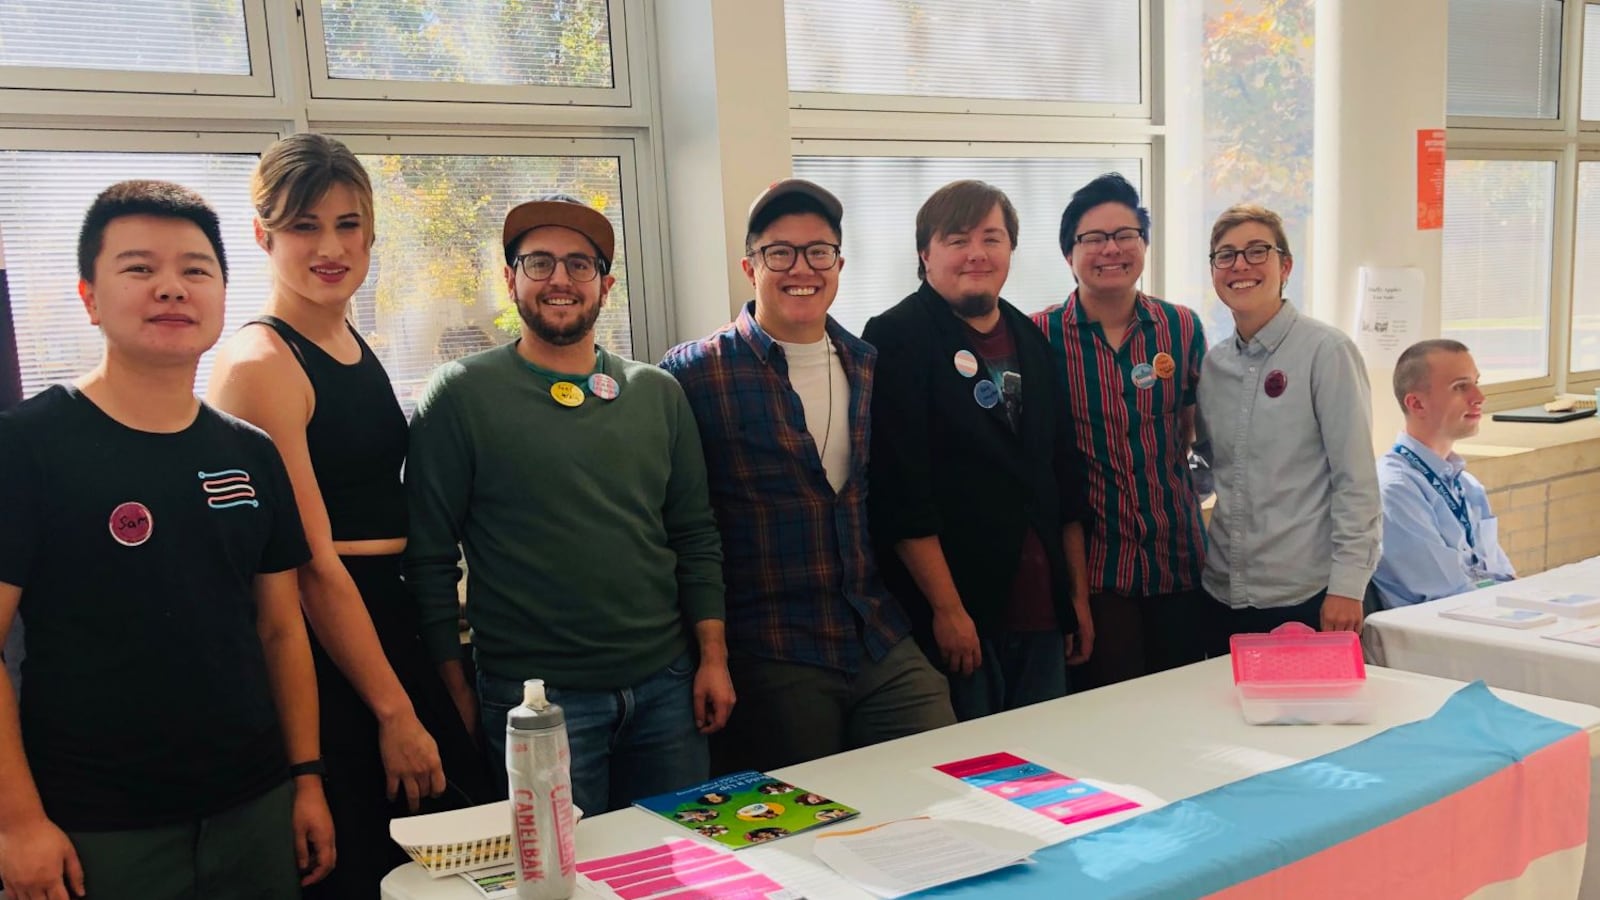 Sam Long, left, and other members of the Colorado Transgender/Nonbinary Educators Network.